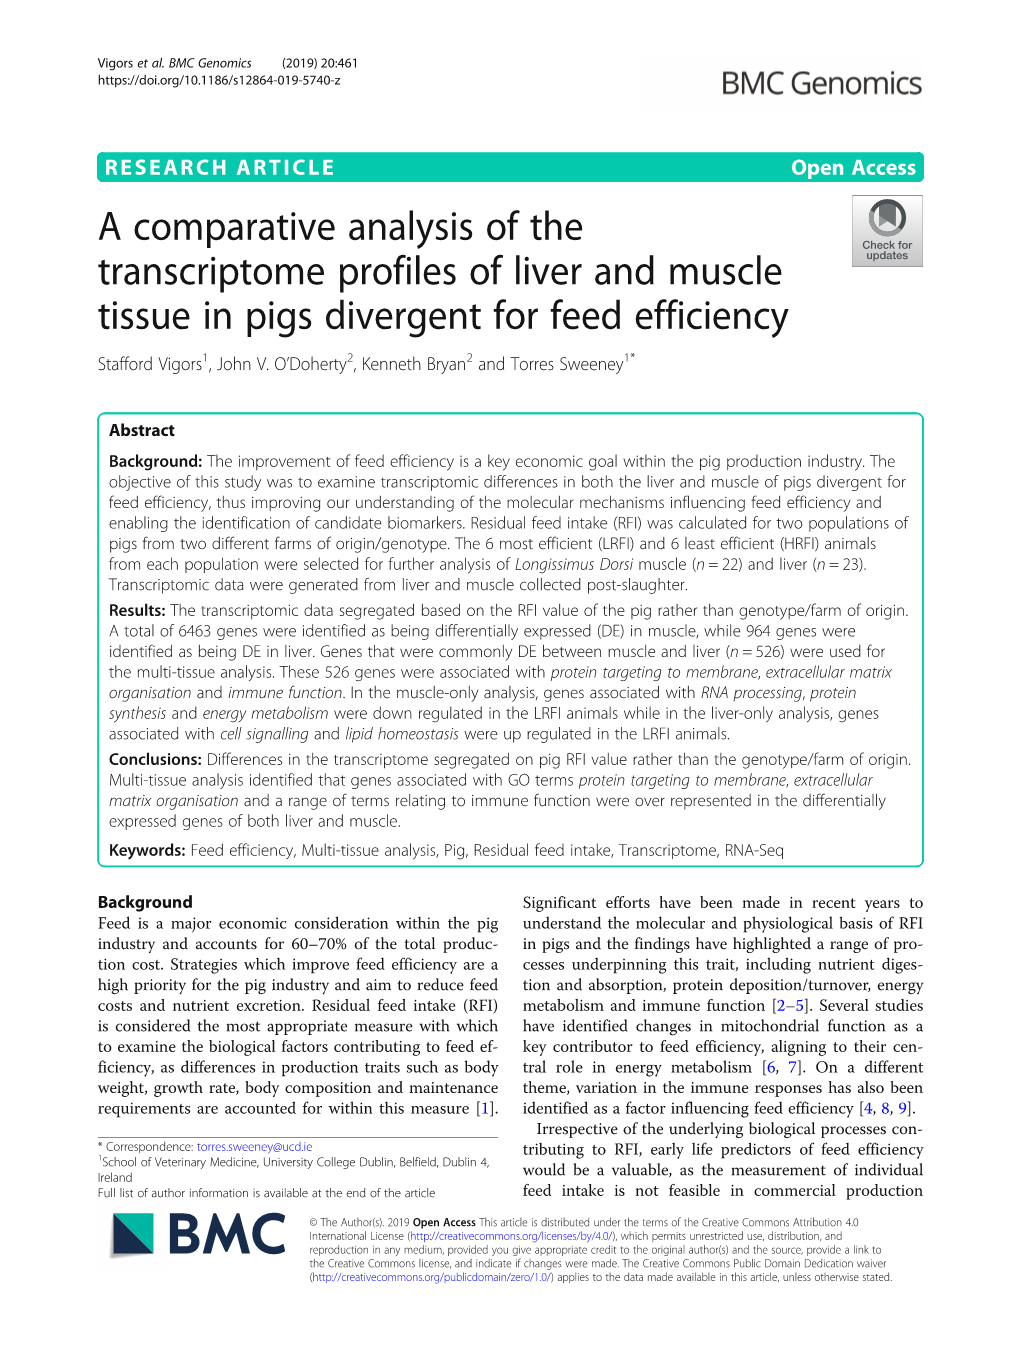 A Comparative Analysis of the Transcriptome Profiles of Liver and Muscle Tissue in Pigs Divergent for Feed Efficiency Stafford Vigors1, John V